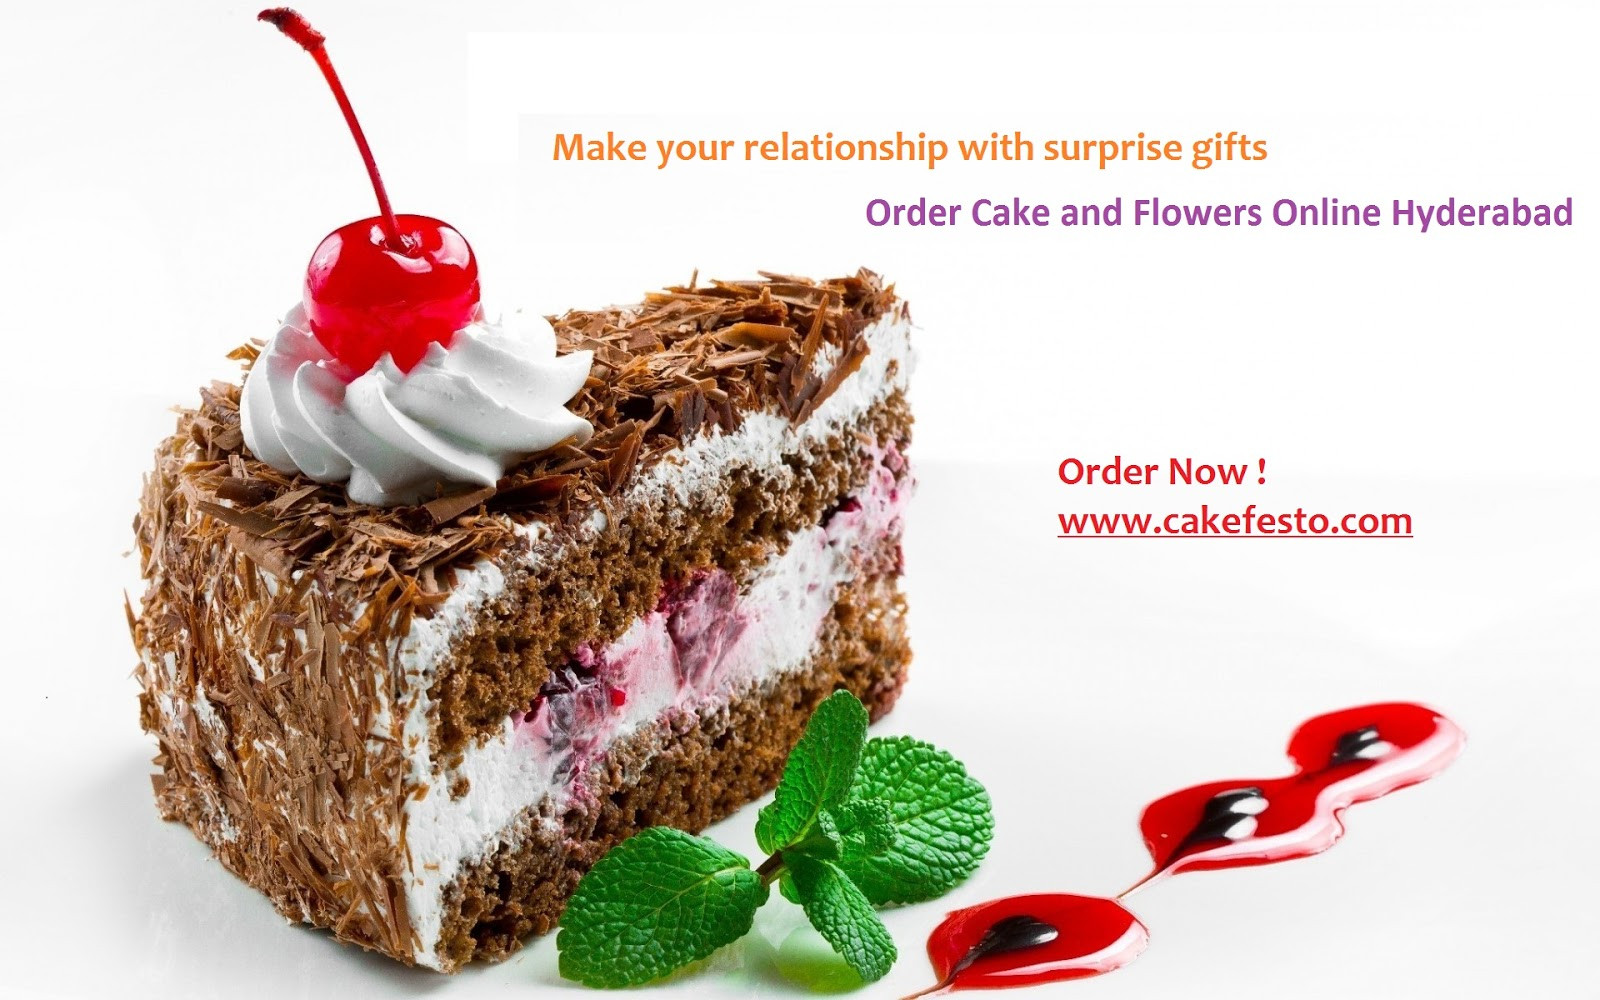 Birthday Cake Order Online
 Order Cake and Flowers line Hyderabad – Make your